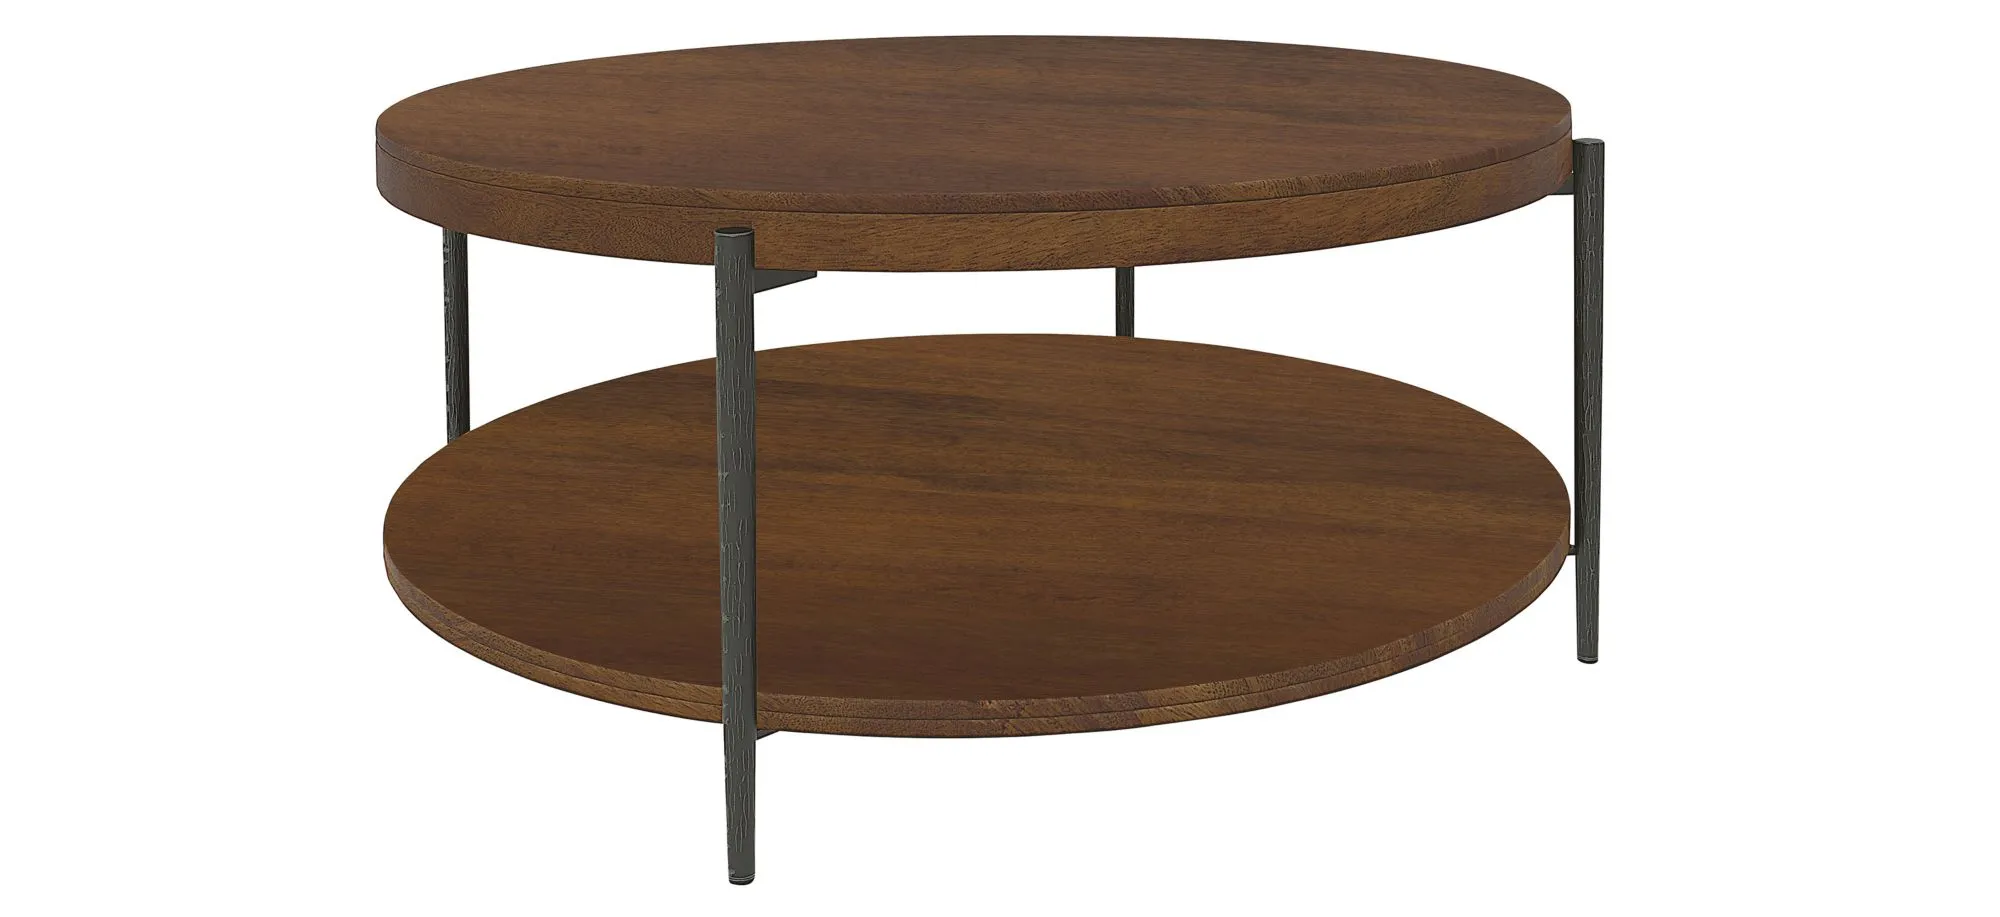 Bedford Park Round Coffee Table in TOBACCO by Hekman Furniture Company